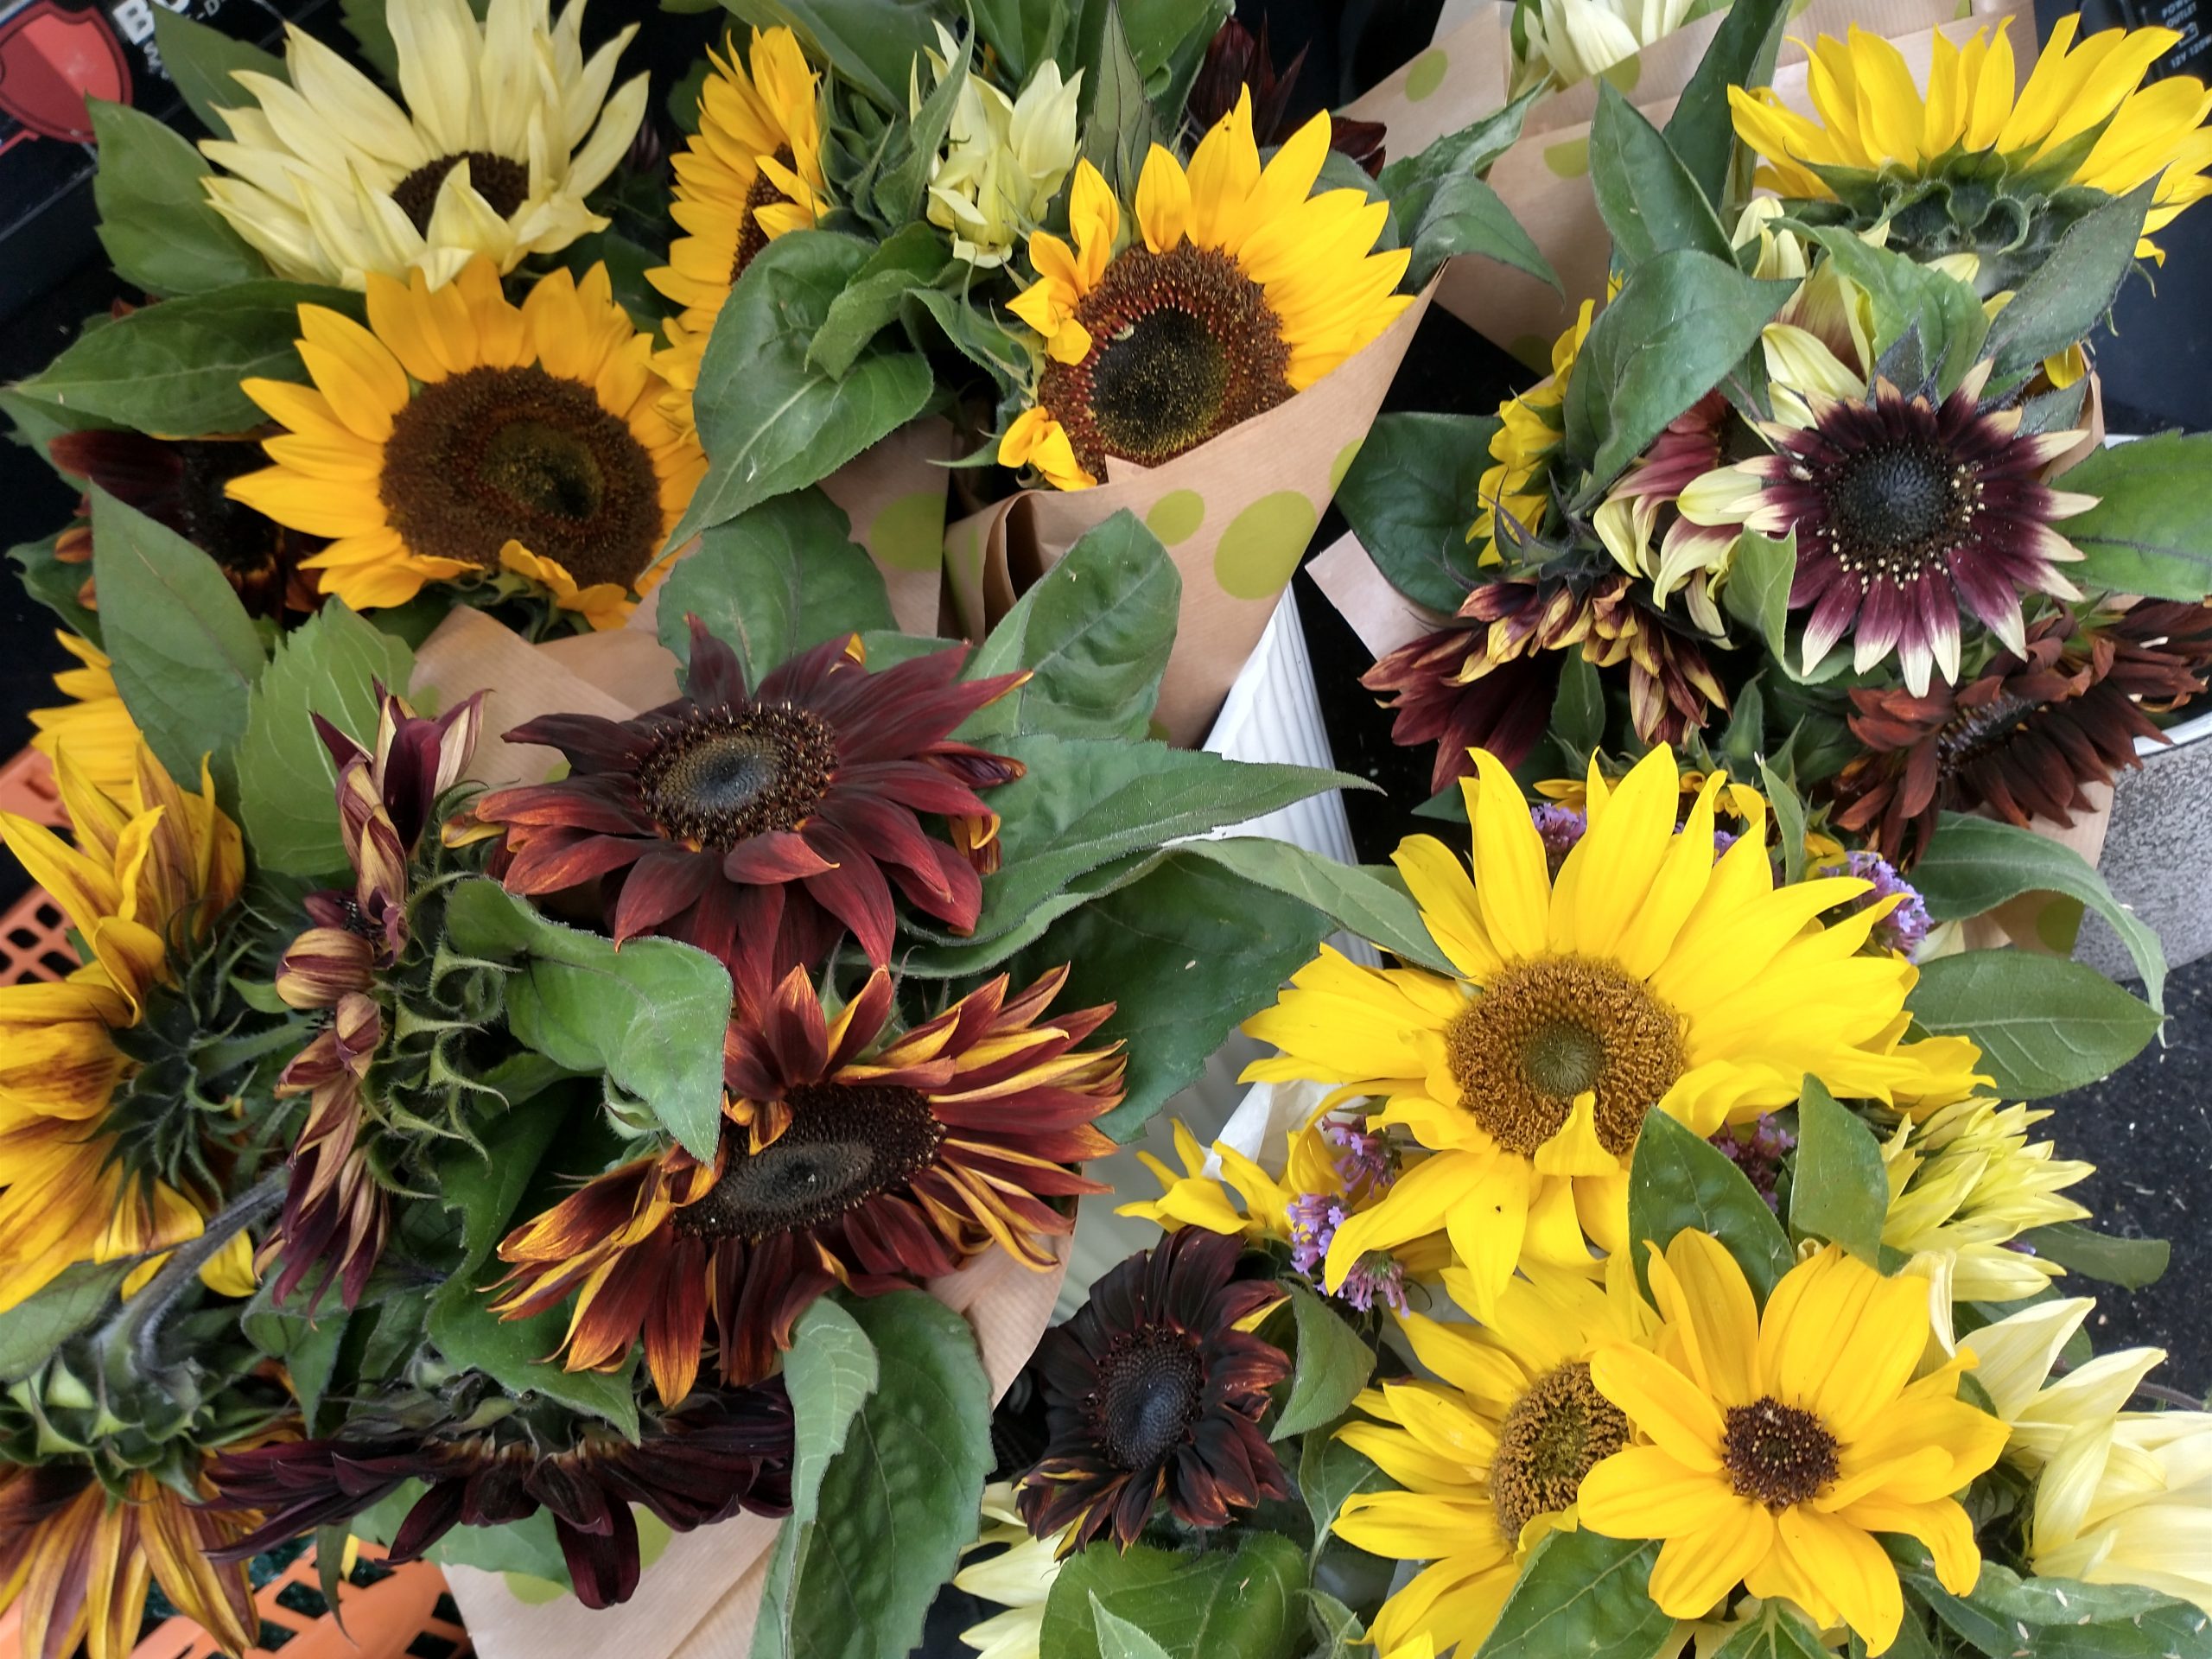 Selling Sunflowers!